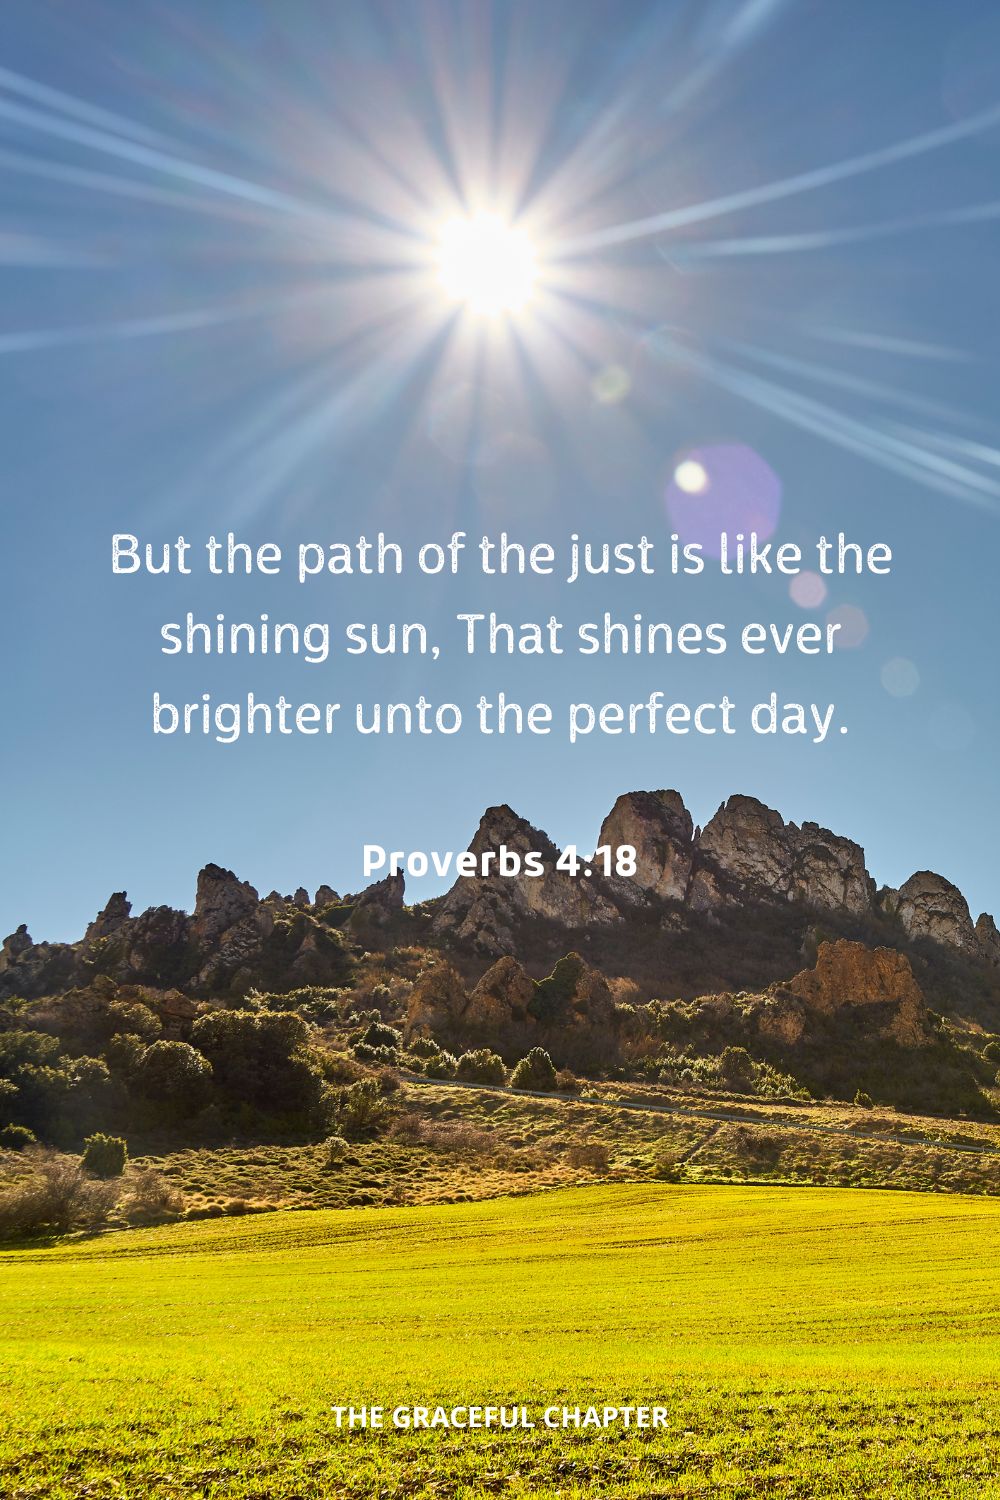 But the path of the just is like the shining sun, That shines ever brighter unto the perfect day.